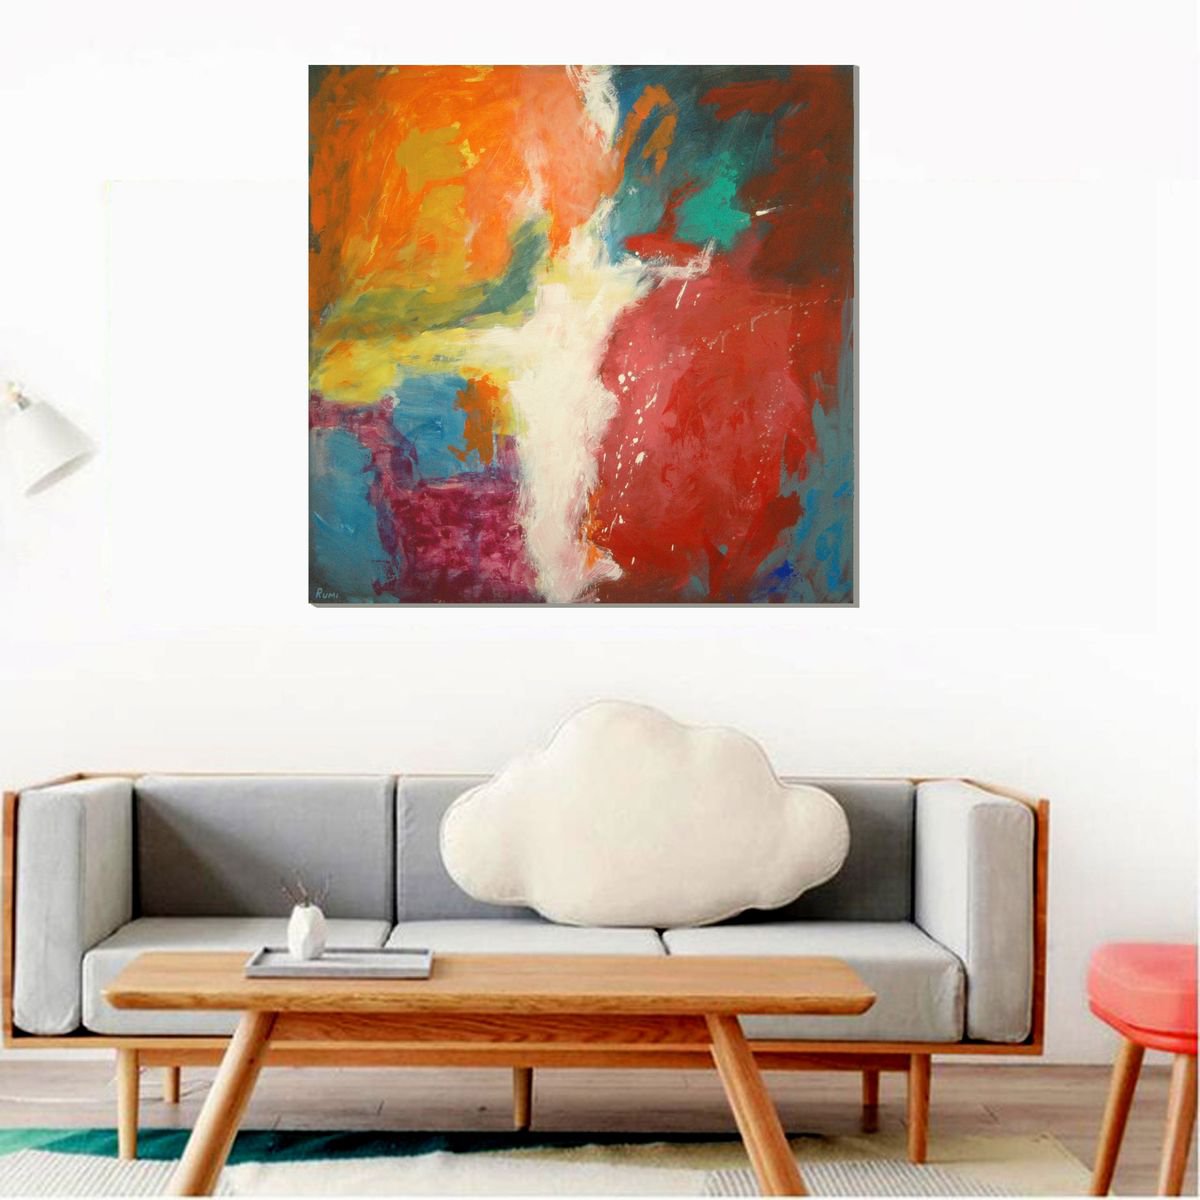 Game Of Colors II. Large acrylic abstract. 100 x 100 cm. by Rumen Spasov